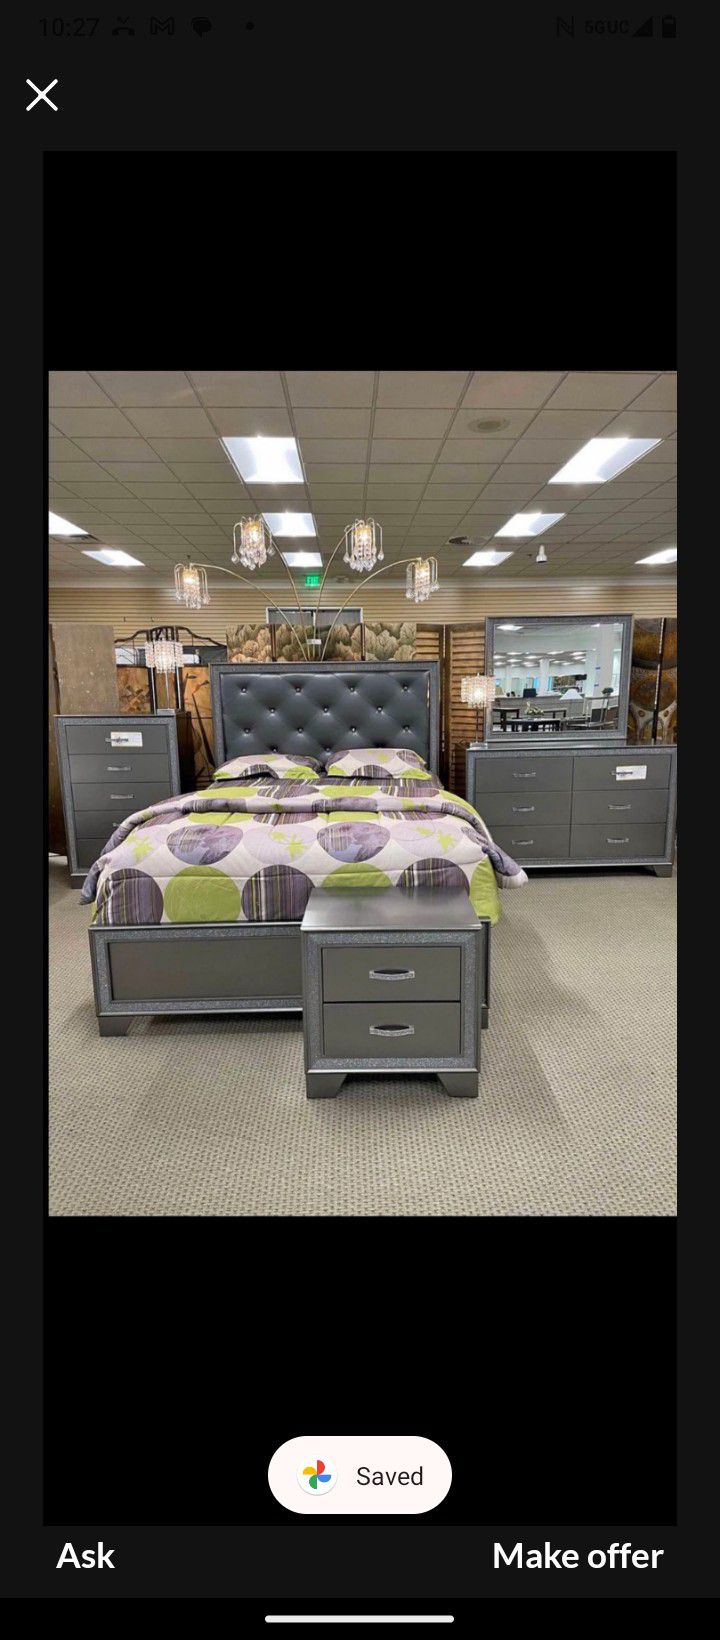 New Queen Size 5 Piece Bedroom Set With Dresser Mirror Nightstand Chest Without Mattress And Free Delivery